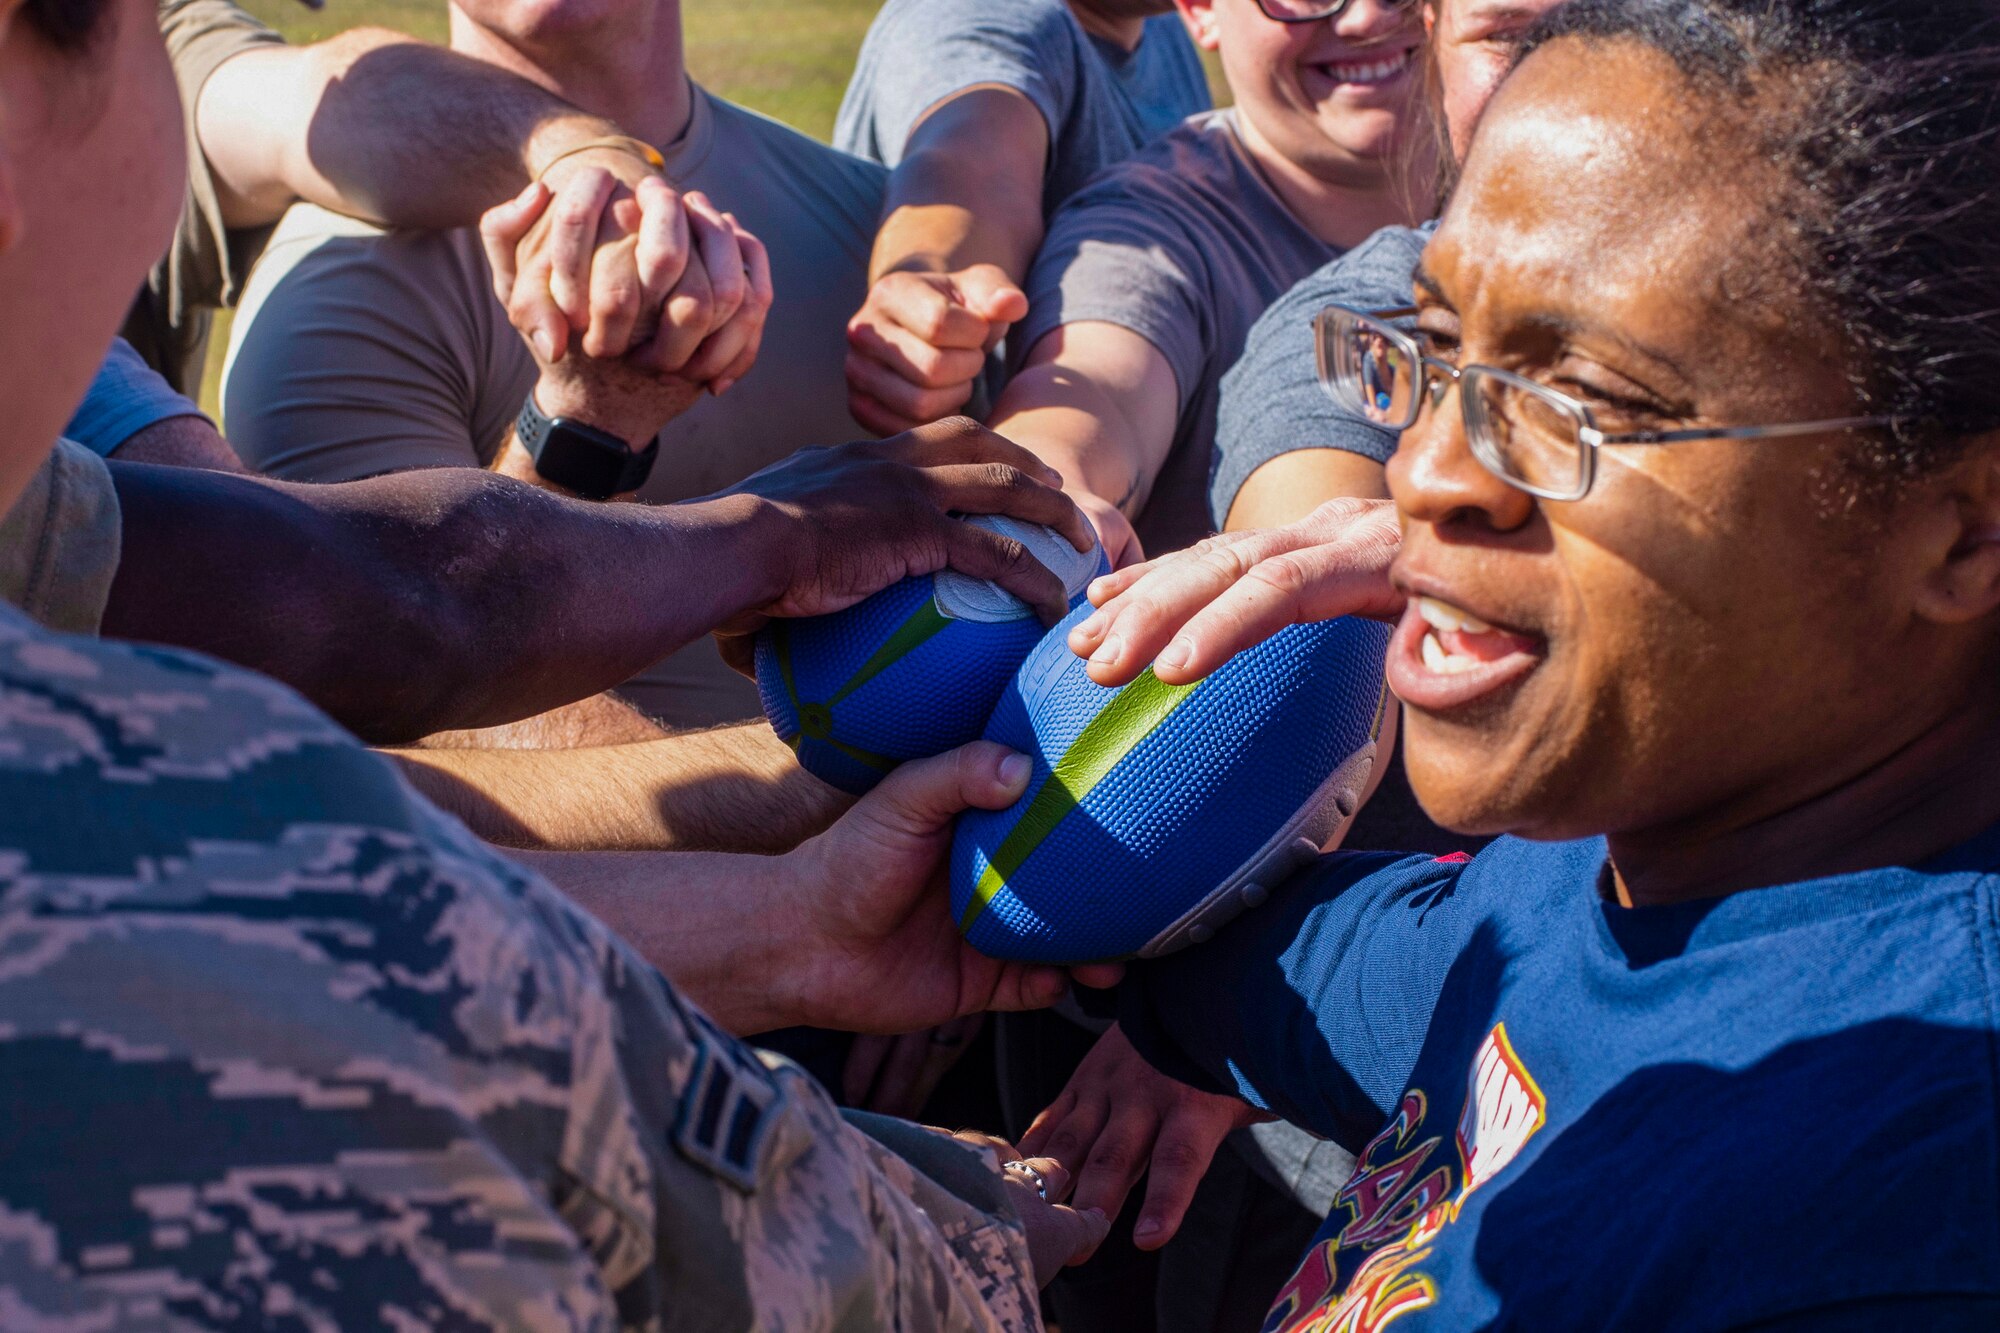 U.S. Air Force Master Sgt. Ashley Taylor, a 20th Security Forces Squadron flight chief, huddles in with her flight at the conclusion of a game at Shaw Air Force Base, South Carolina, Oct. 17, 2019.